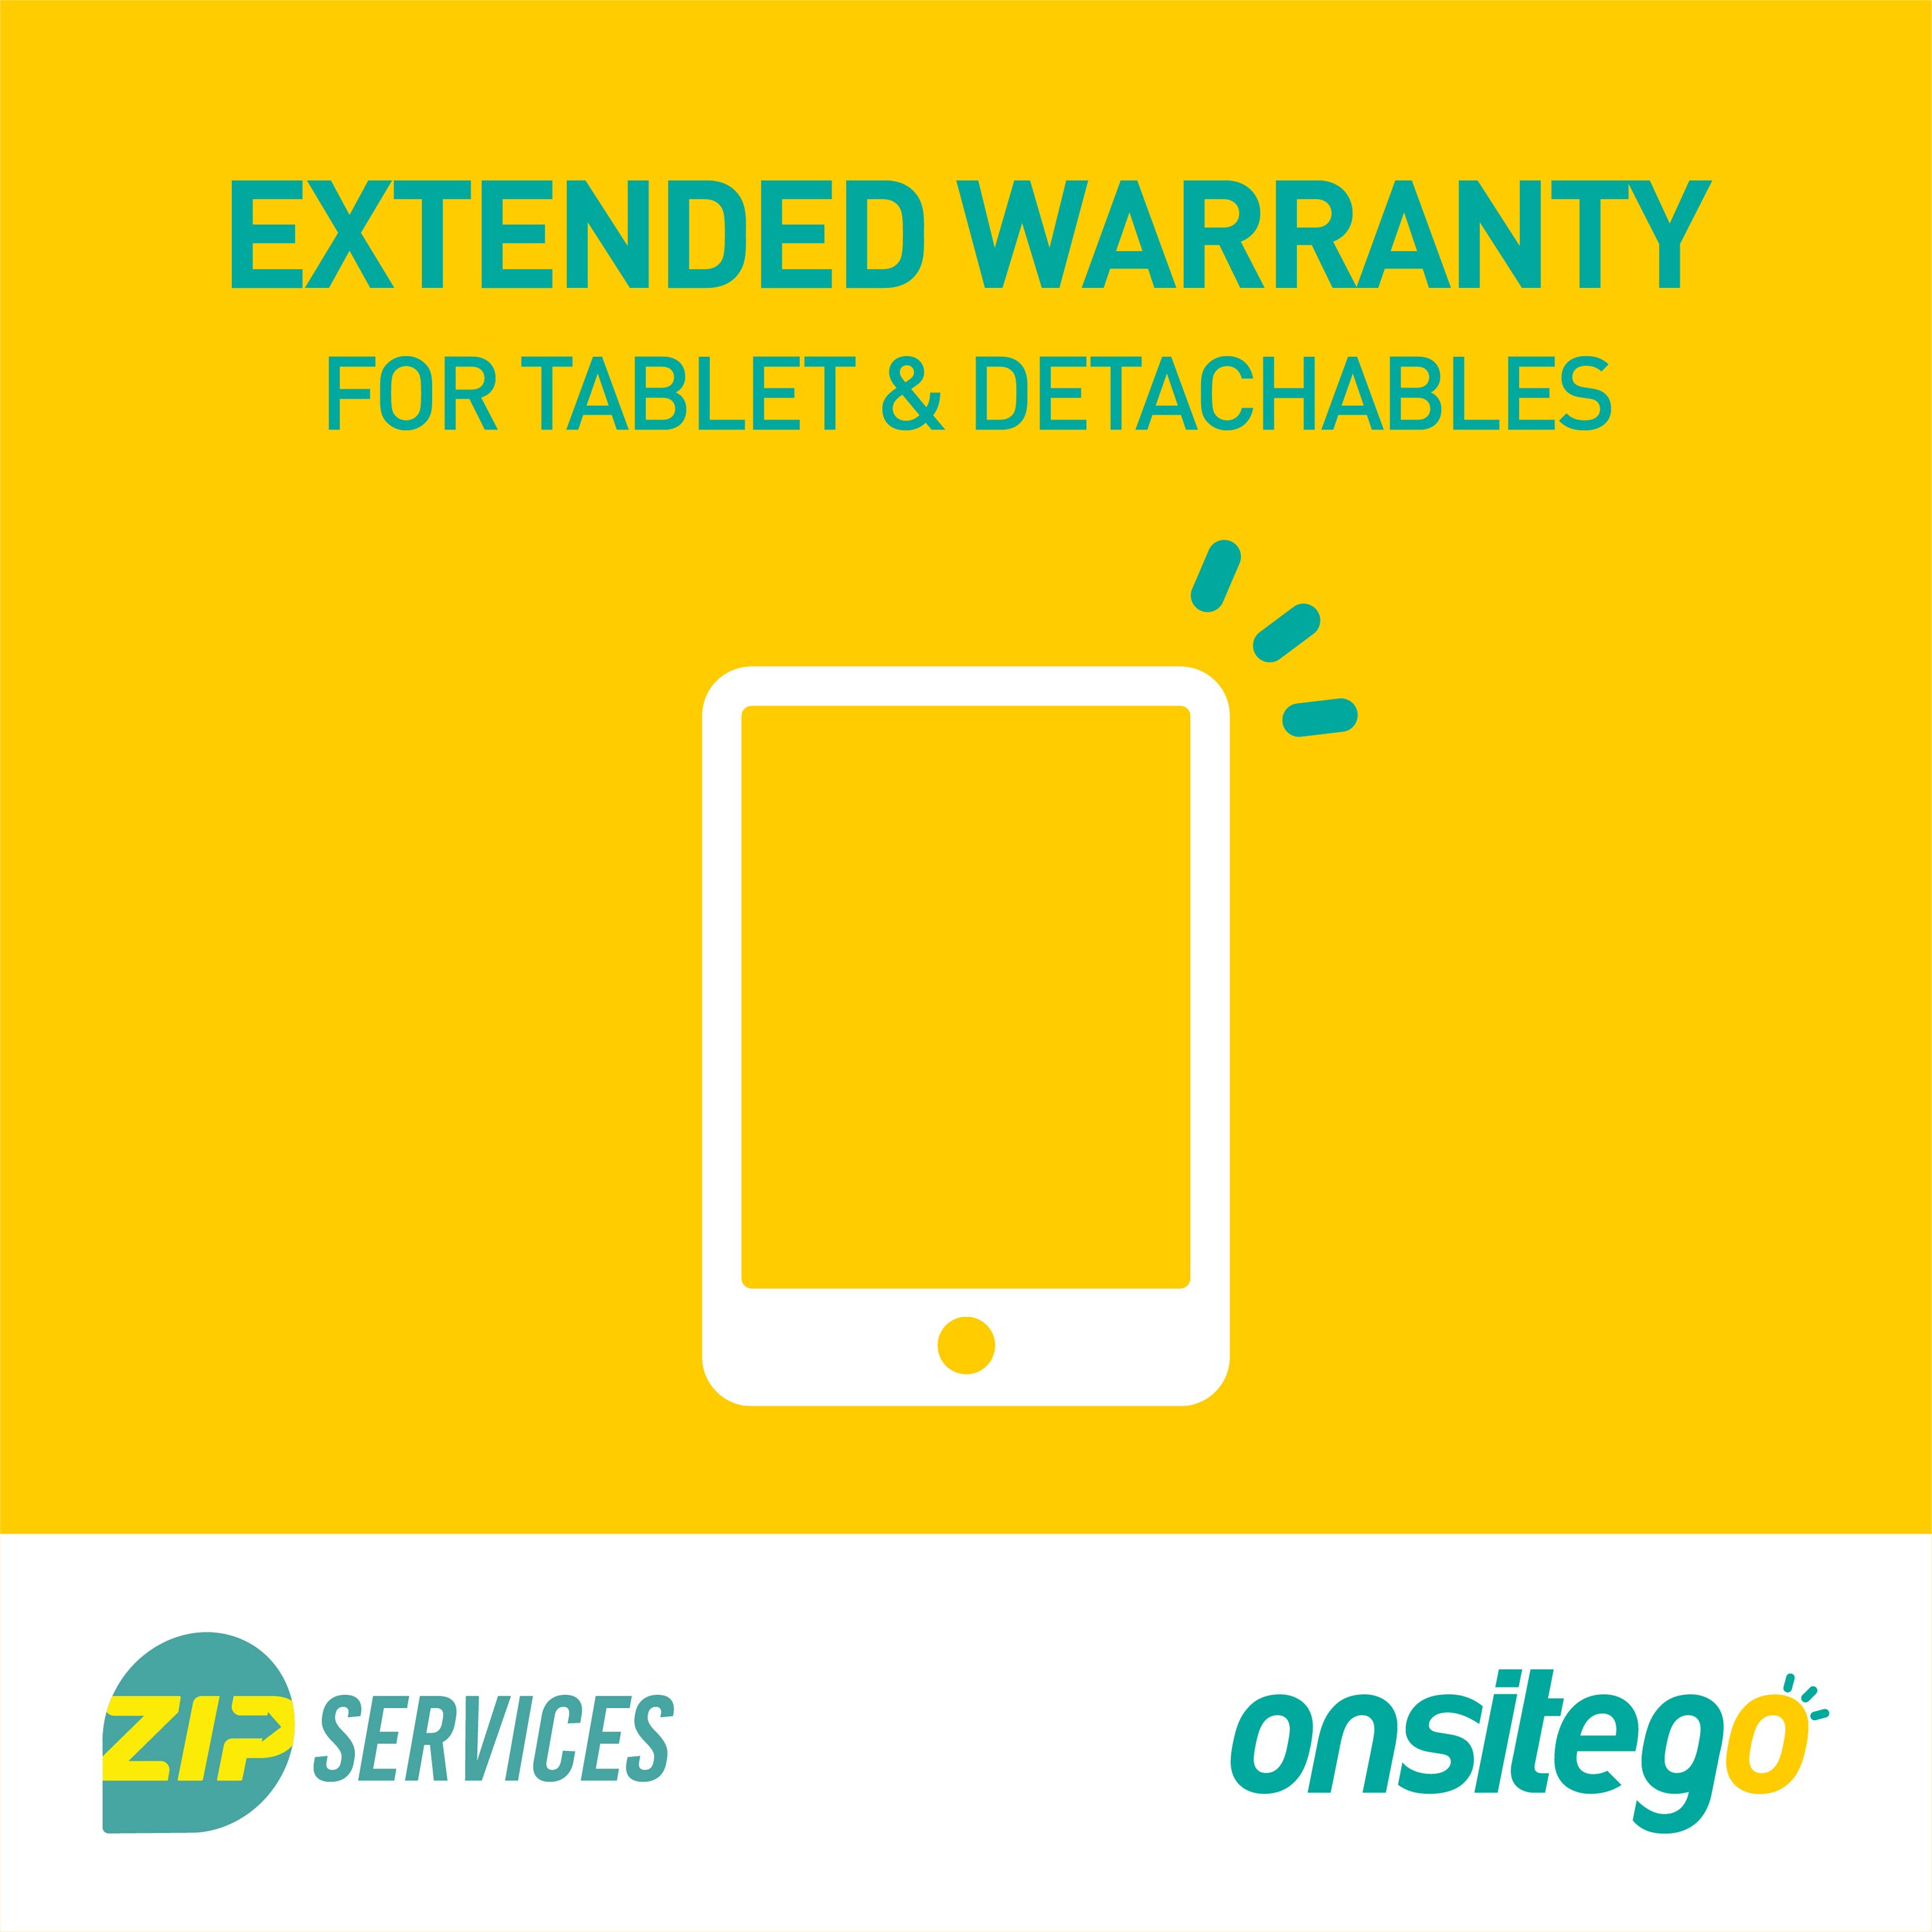 Onsitego 3 Months Extended Warranty for Tablets Rs.125001 - Rs.130000_1